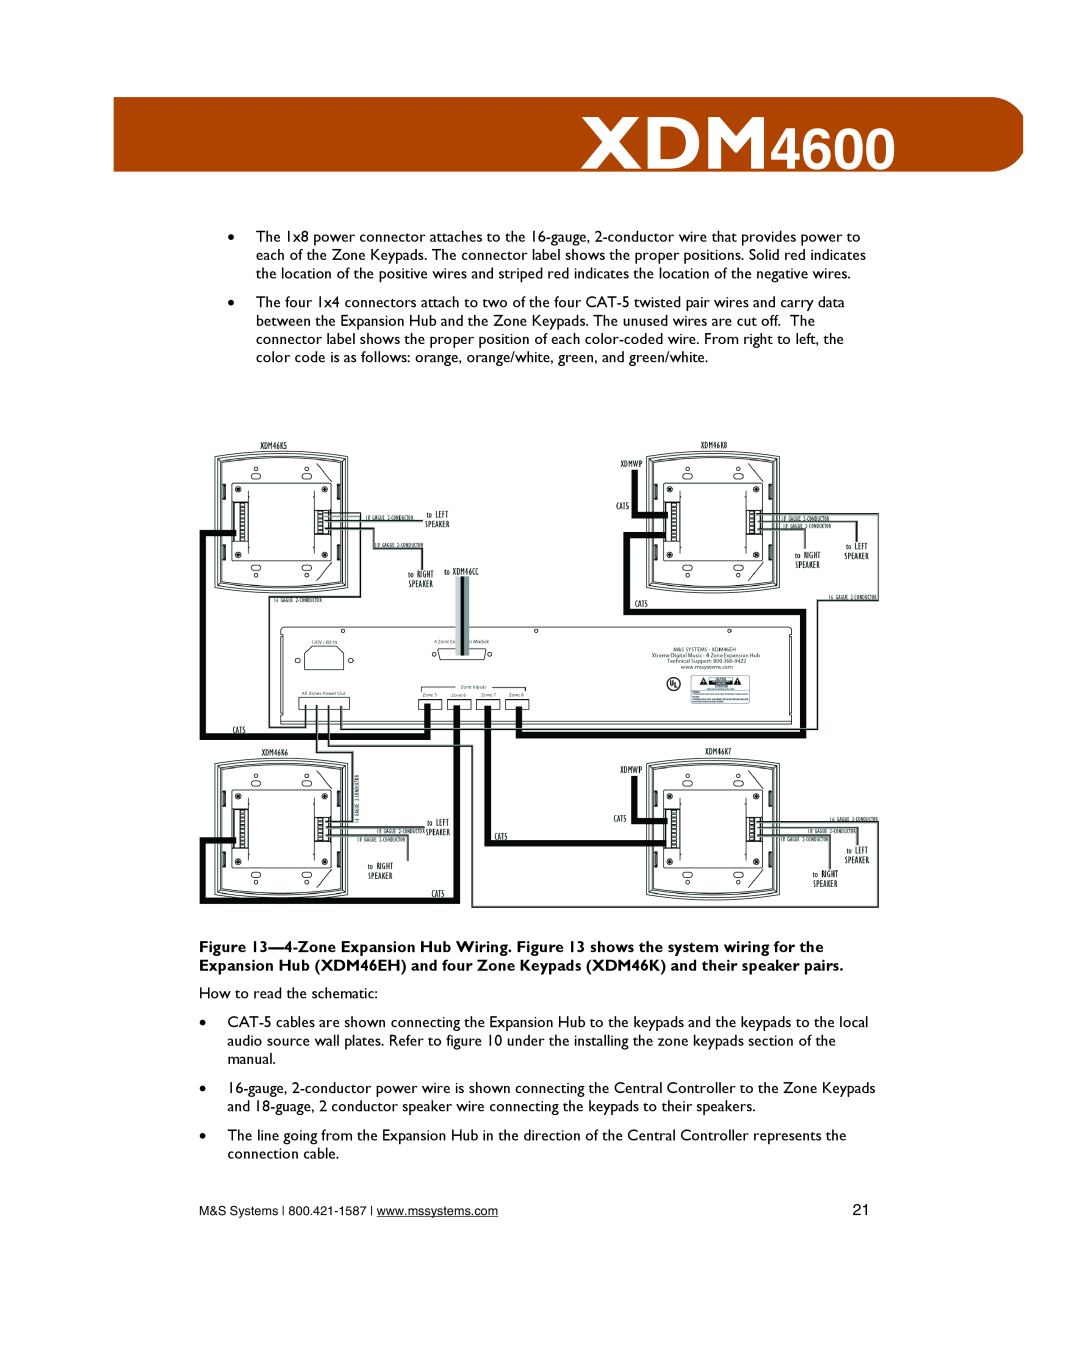 M&S Systems XDM4600 owner manual How to read the schematic 